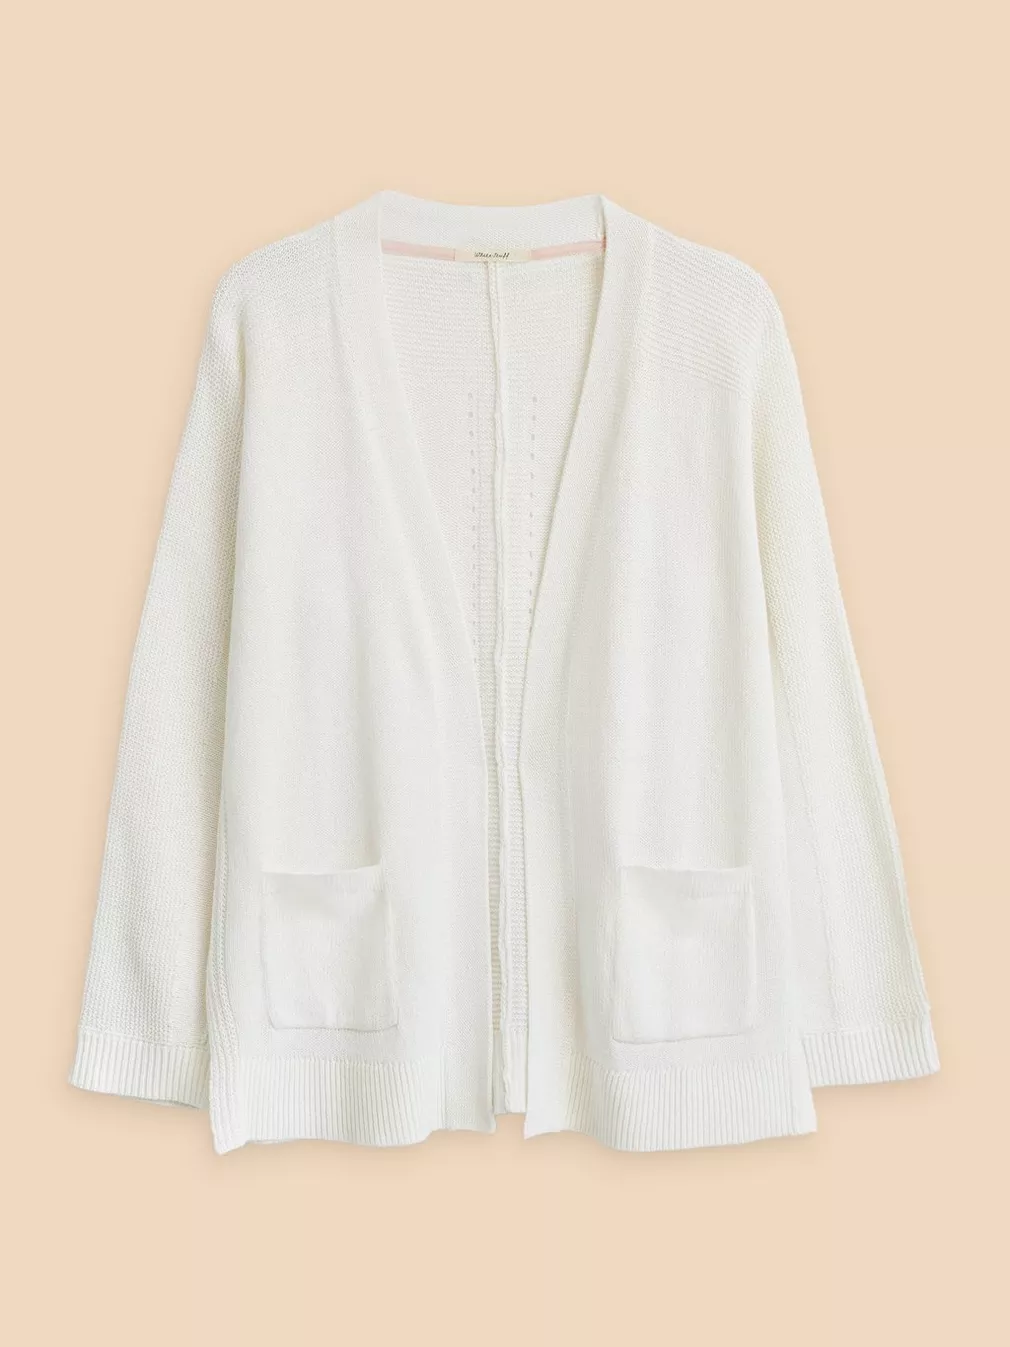 White Stuff Tiana Cardi - Natural White Clothing - Tops - Sweaters - Cardigans by White Stuff | Grace the Boutique